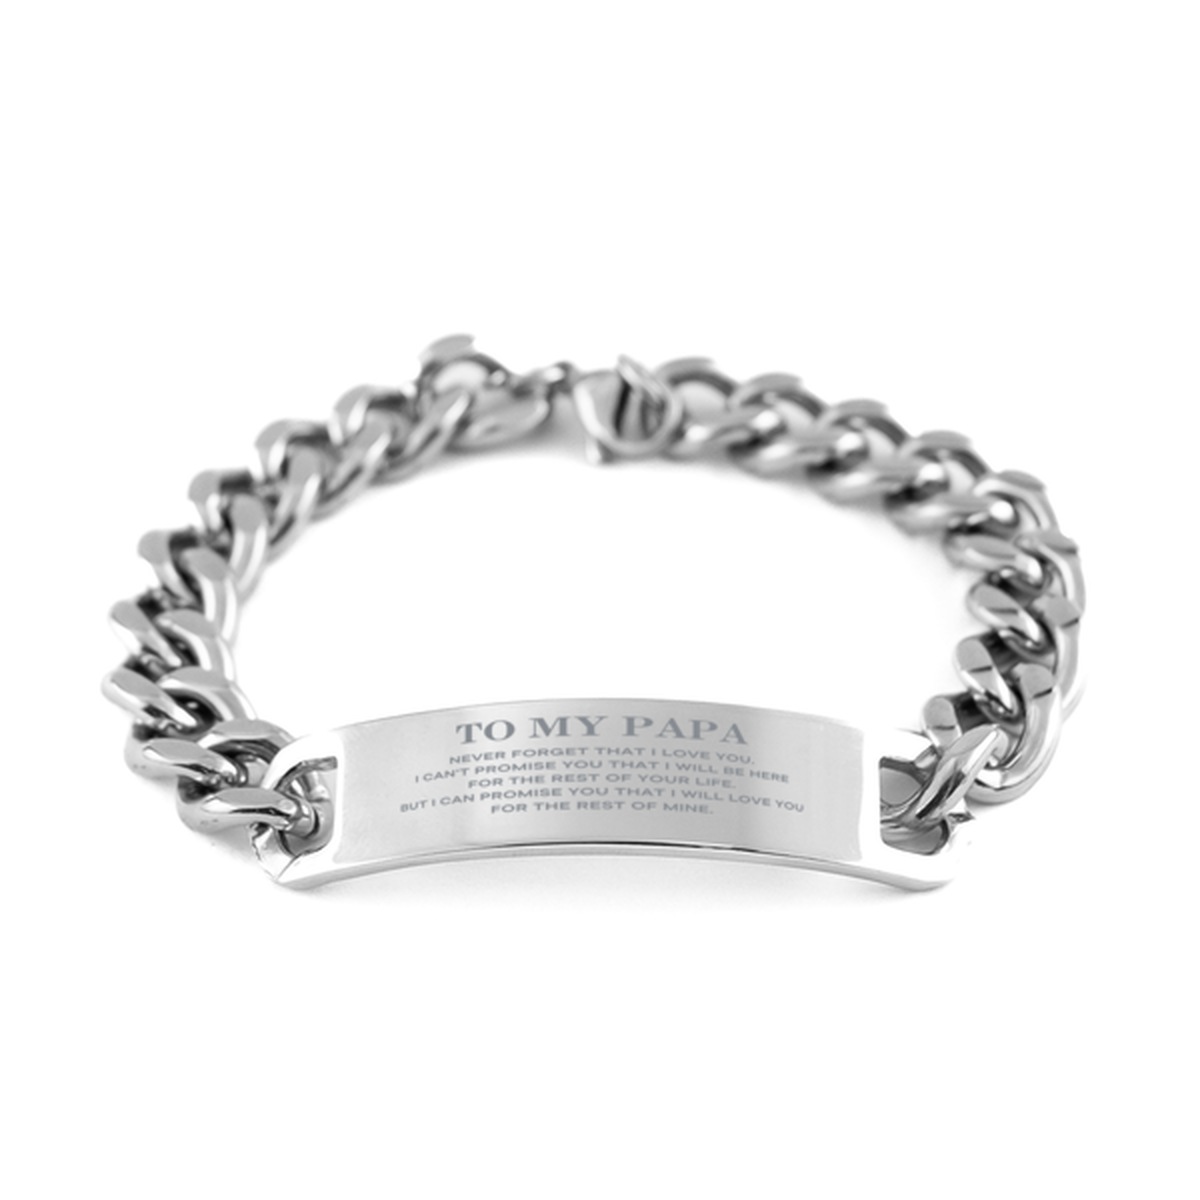 To My Papa Gifts, I will love you for the rest of mine, Love Papa Bracelet, Birthday Christmas Unique Cuban Chain Stainless Steel Bracelet For Papa